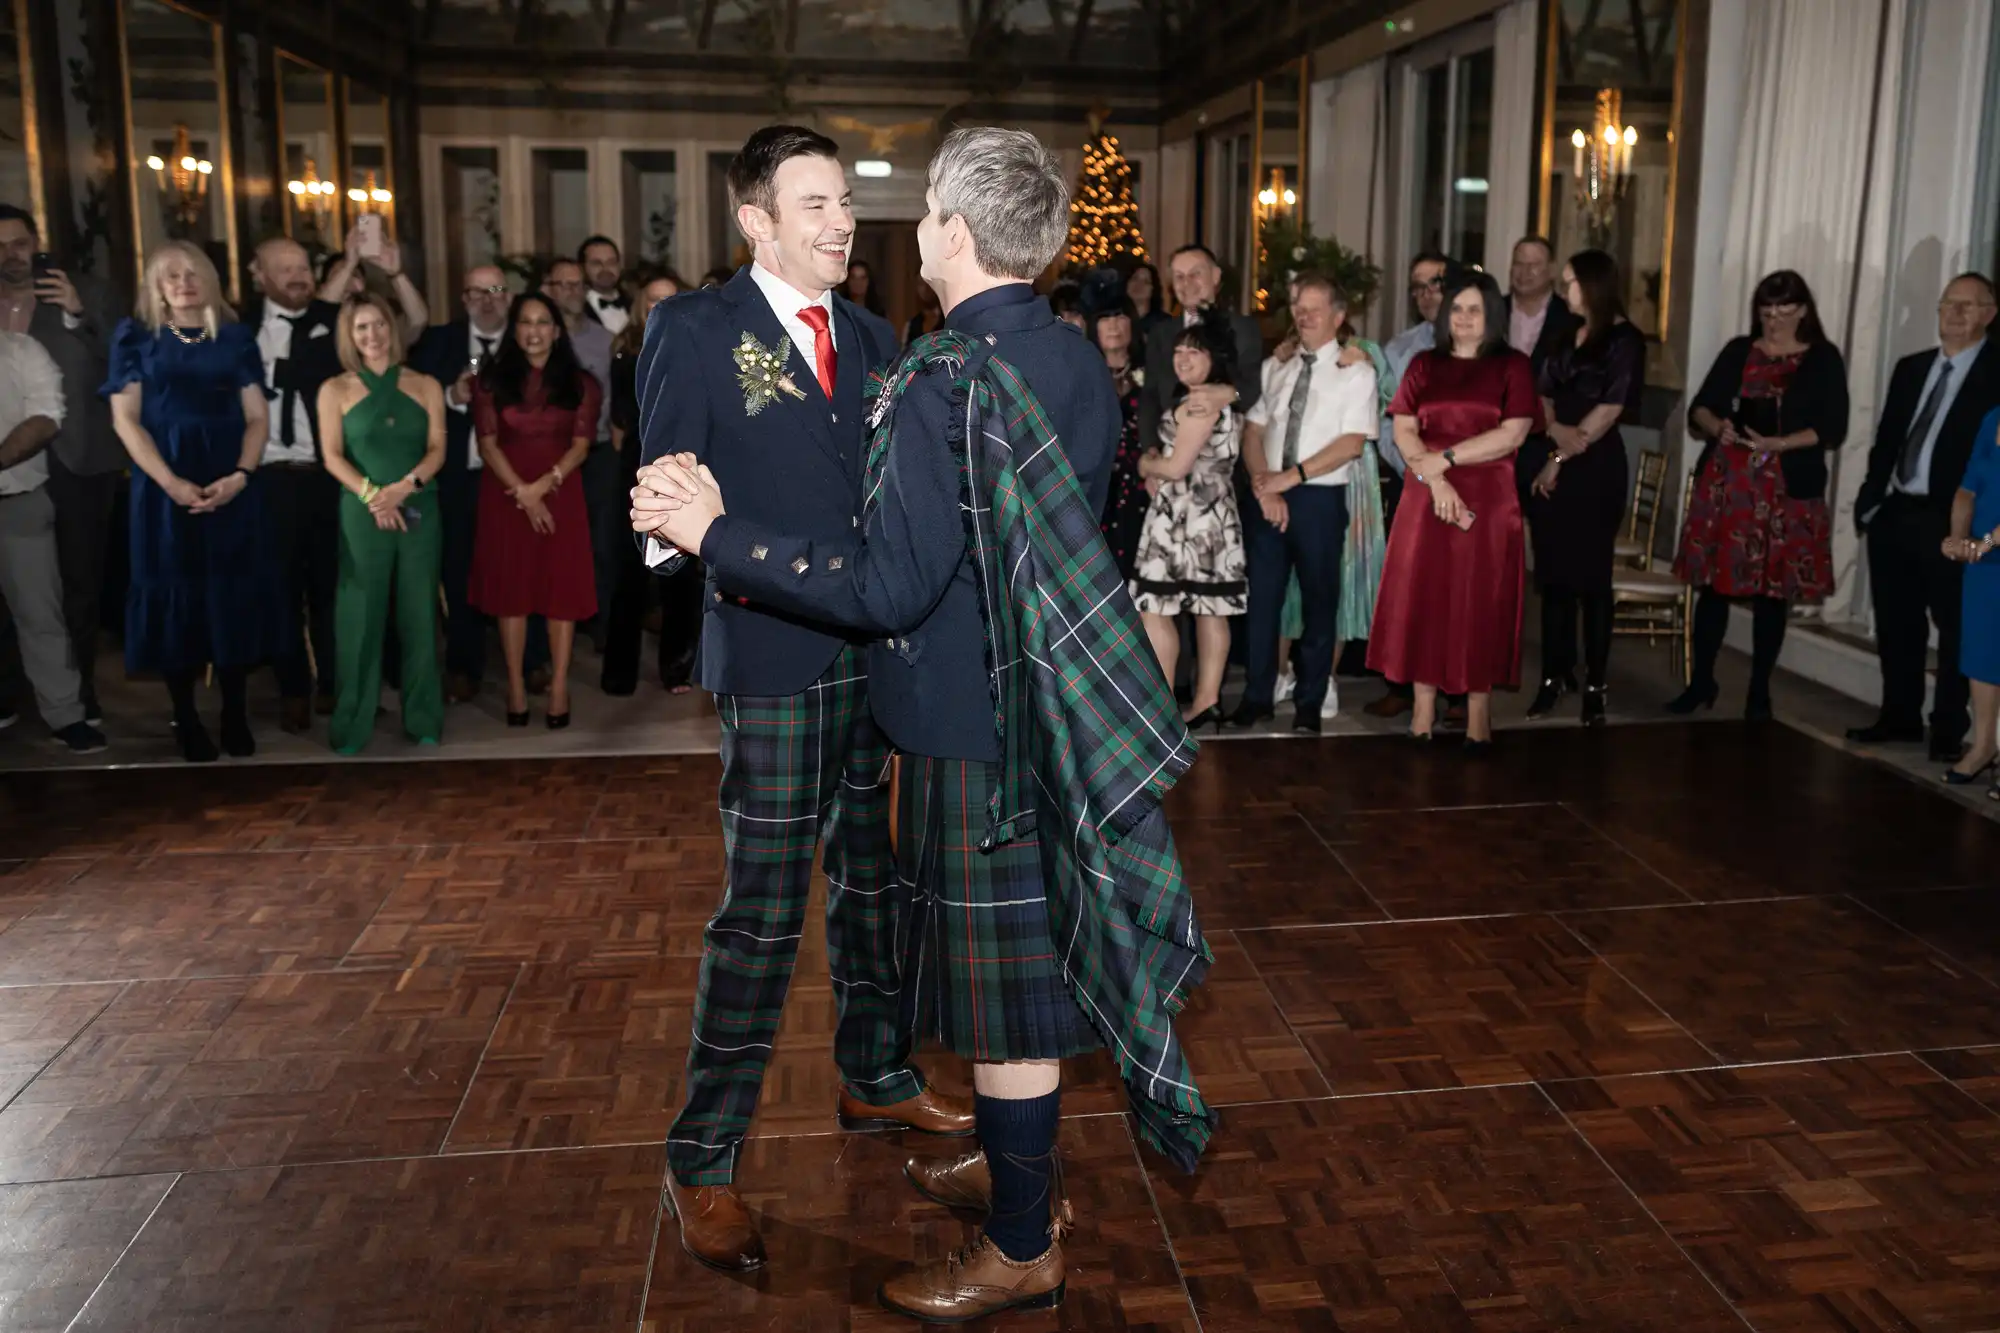 Two men, both wearing tartan kilts, dance together in a large room with wooden floors, while a group of people watch and smile in the background.